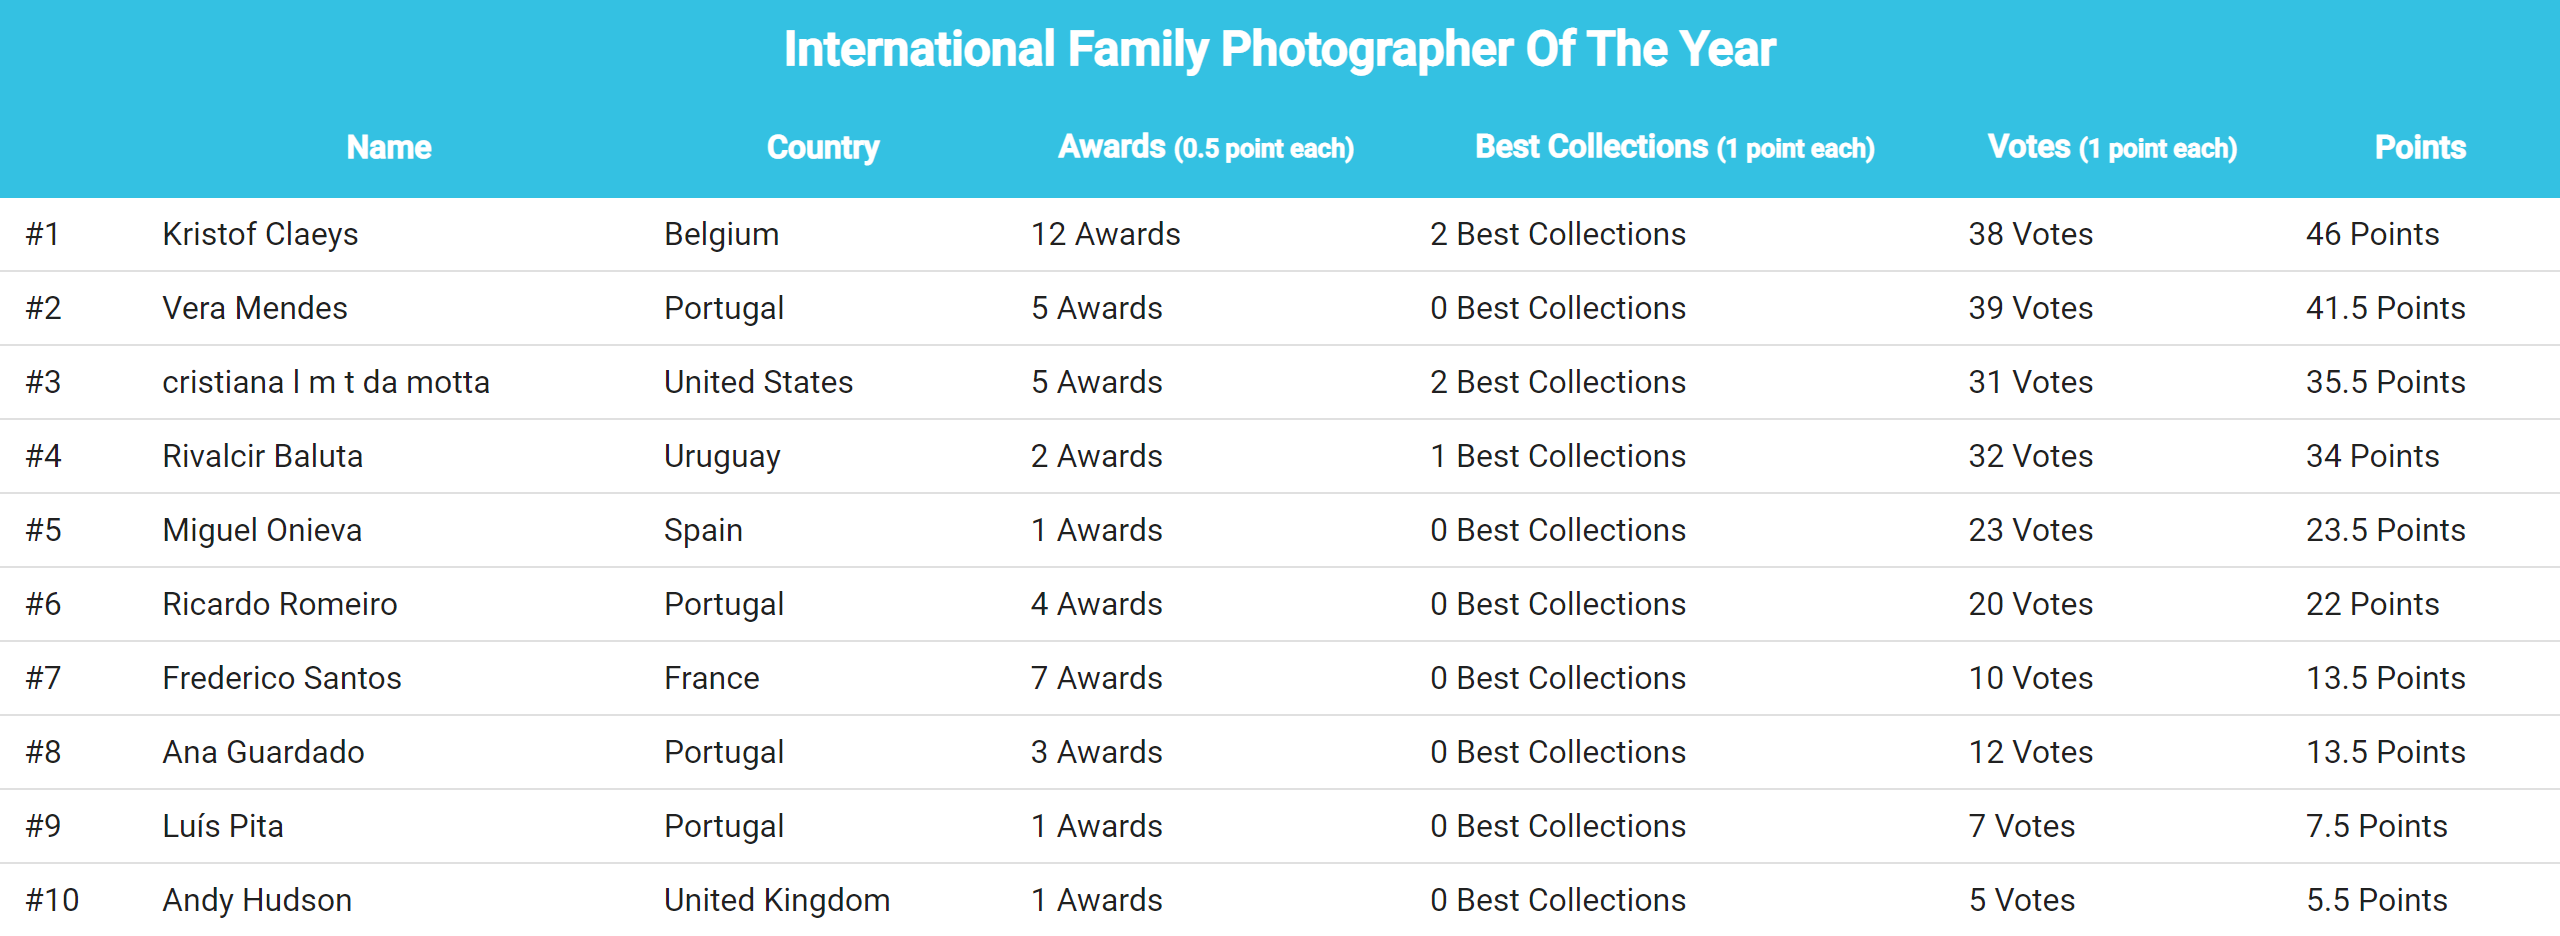 international_family_photographer_of_the_year_2021